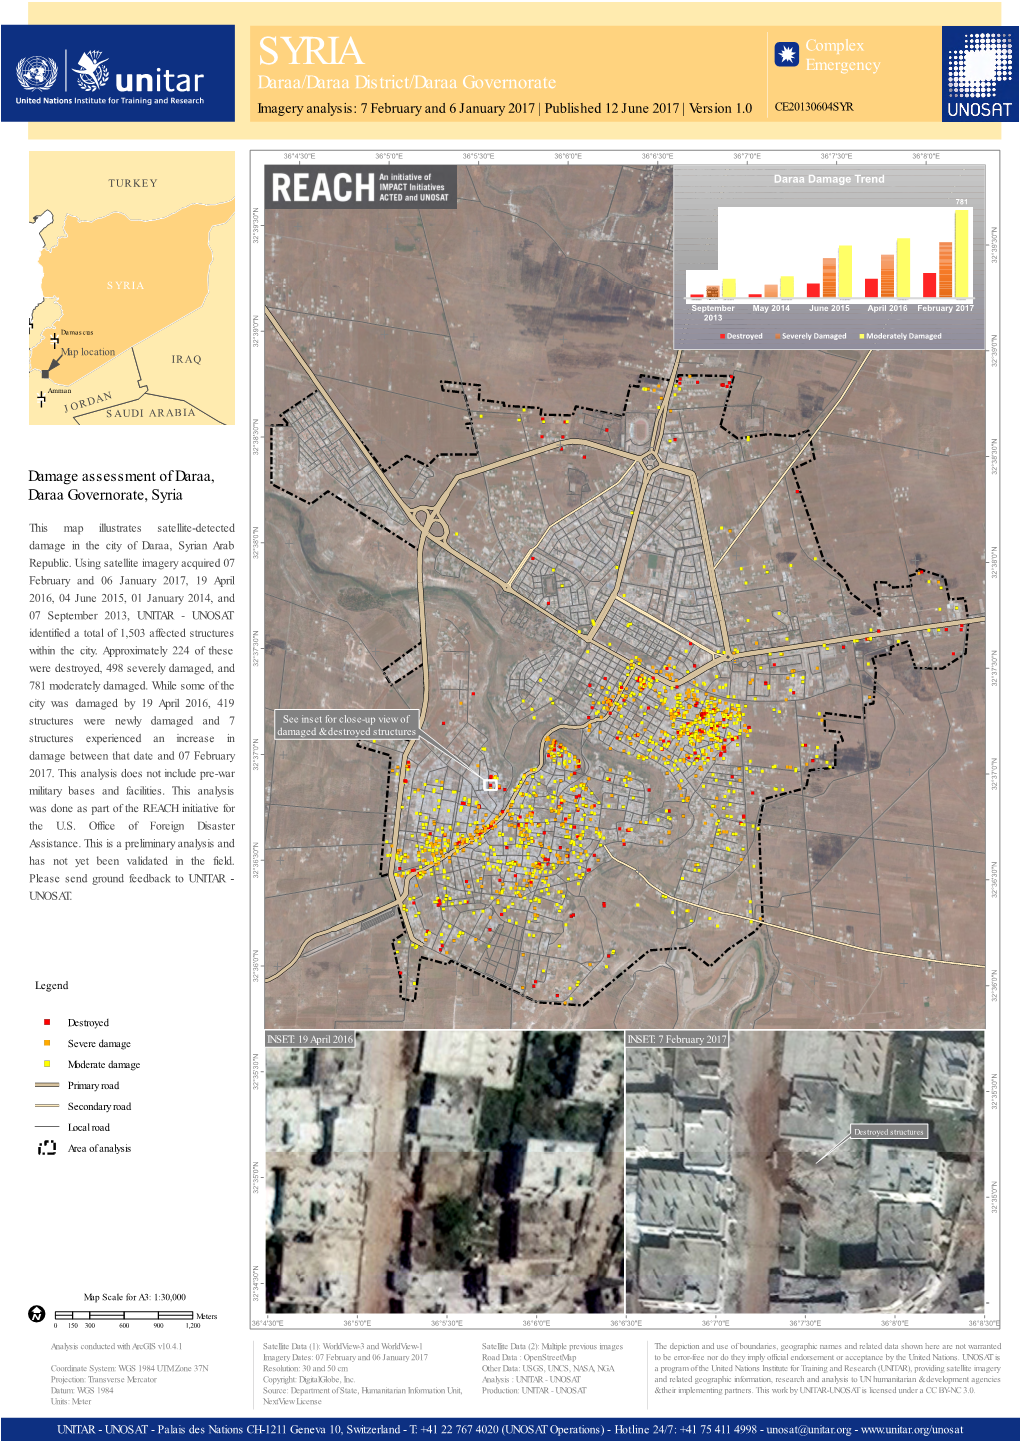 Daraa/Daraa District/Daraa Governorate Imagery Analysis: 7 February and 6 January 2017 | Published 12 June 2017 | Version 1.0 CE20130604SYR